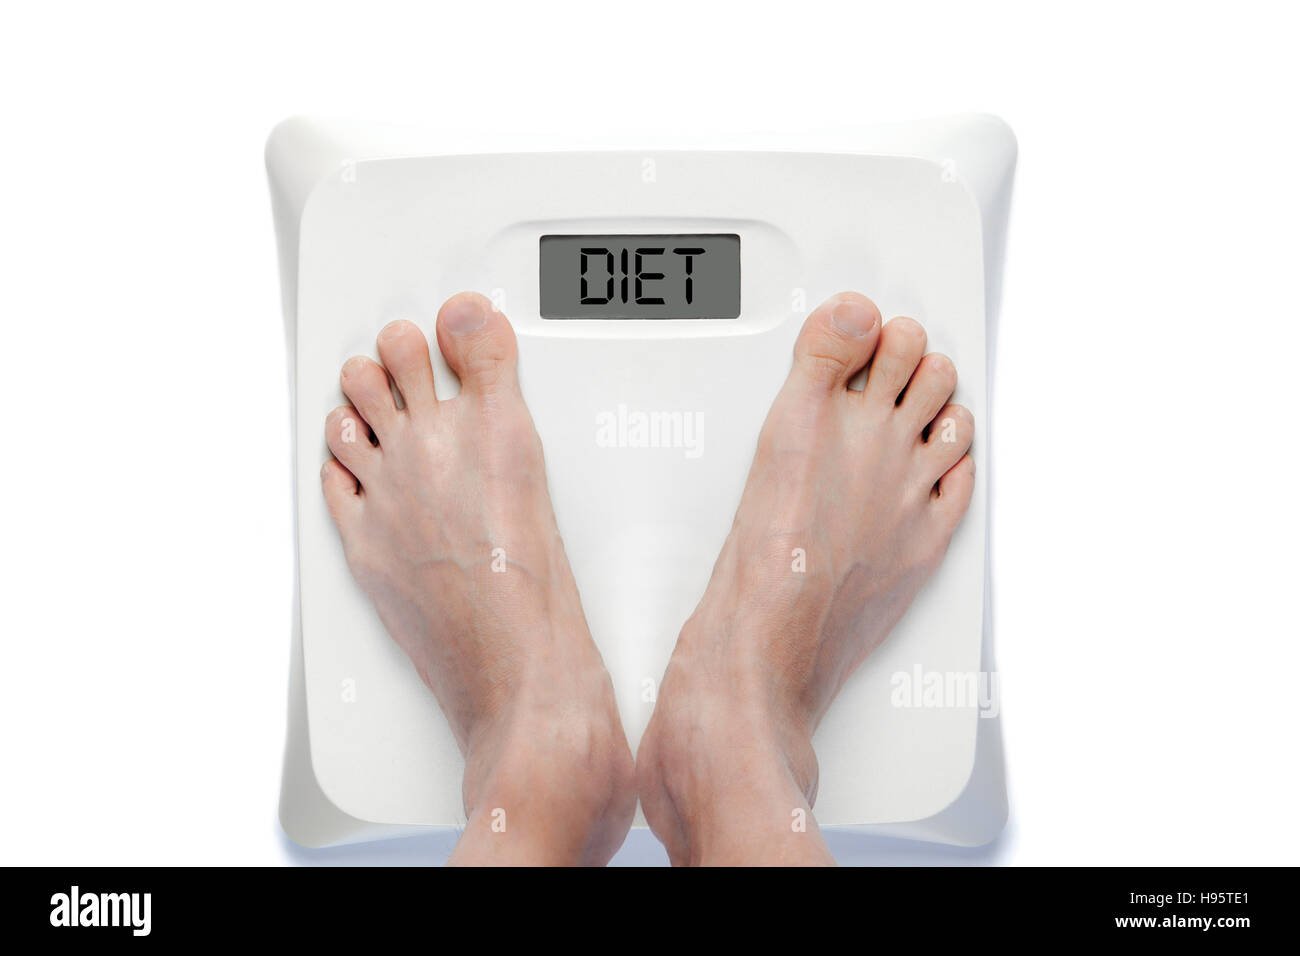 Feet on bathroom scale with the word DIET on screen. Signifies either overweight or underweight health problems requiring proper dieting. Stock Photo